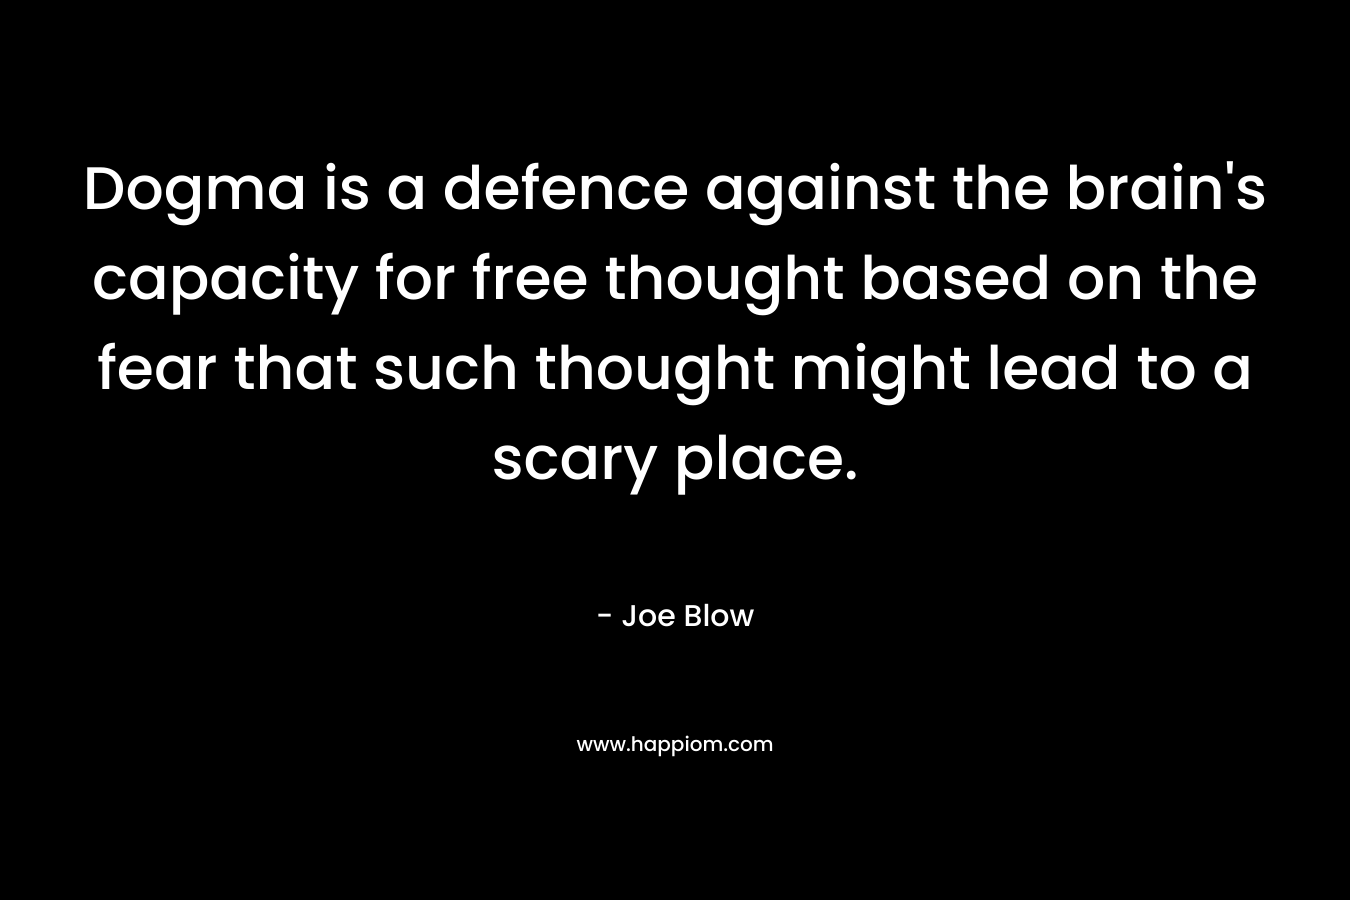 Dogma is a defence against the brain’s capacity for free thought based on the fear that such thought might lead to a scary place. – Joe Blow